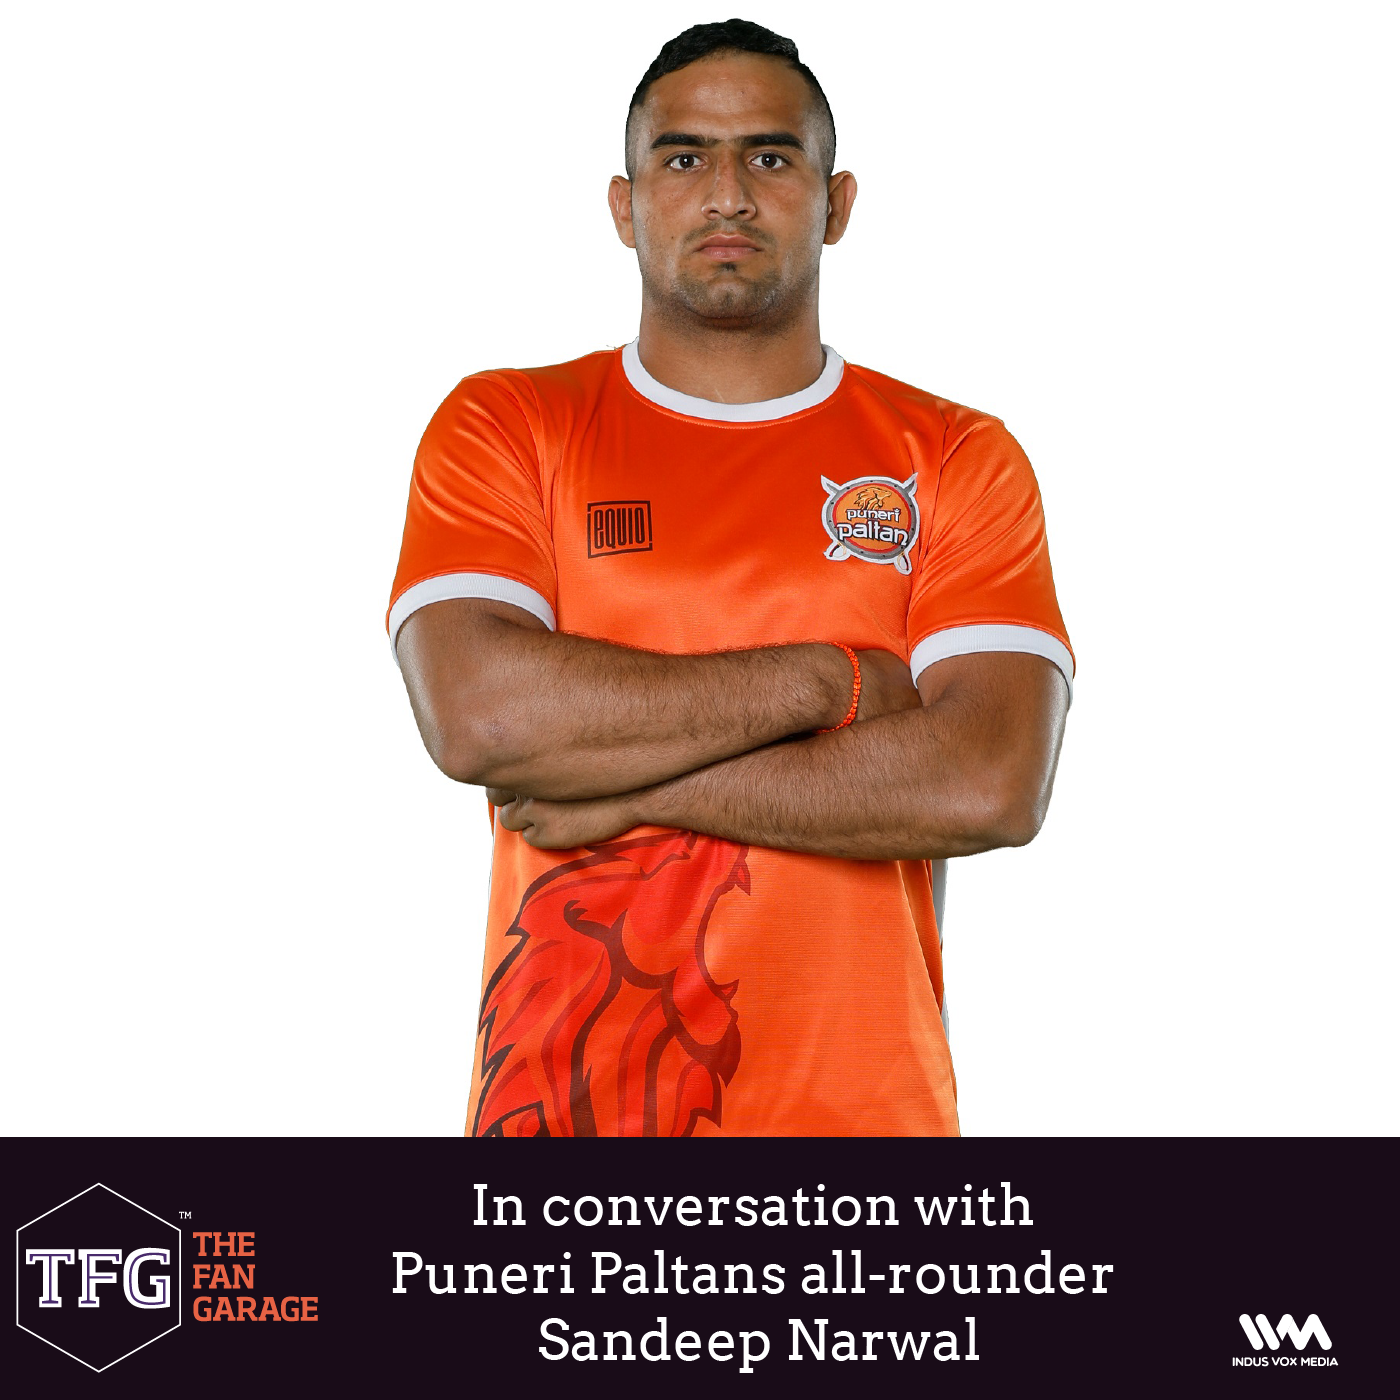 TFG interviews Ep. 022: In conversation with Puneri Paltans all-rounder Sandeep Narwal